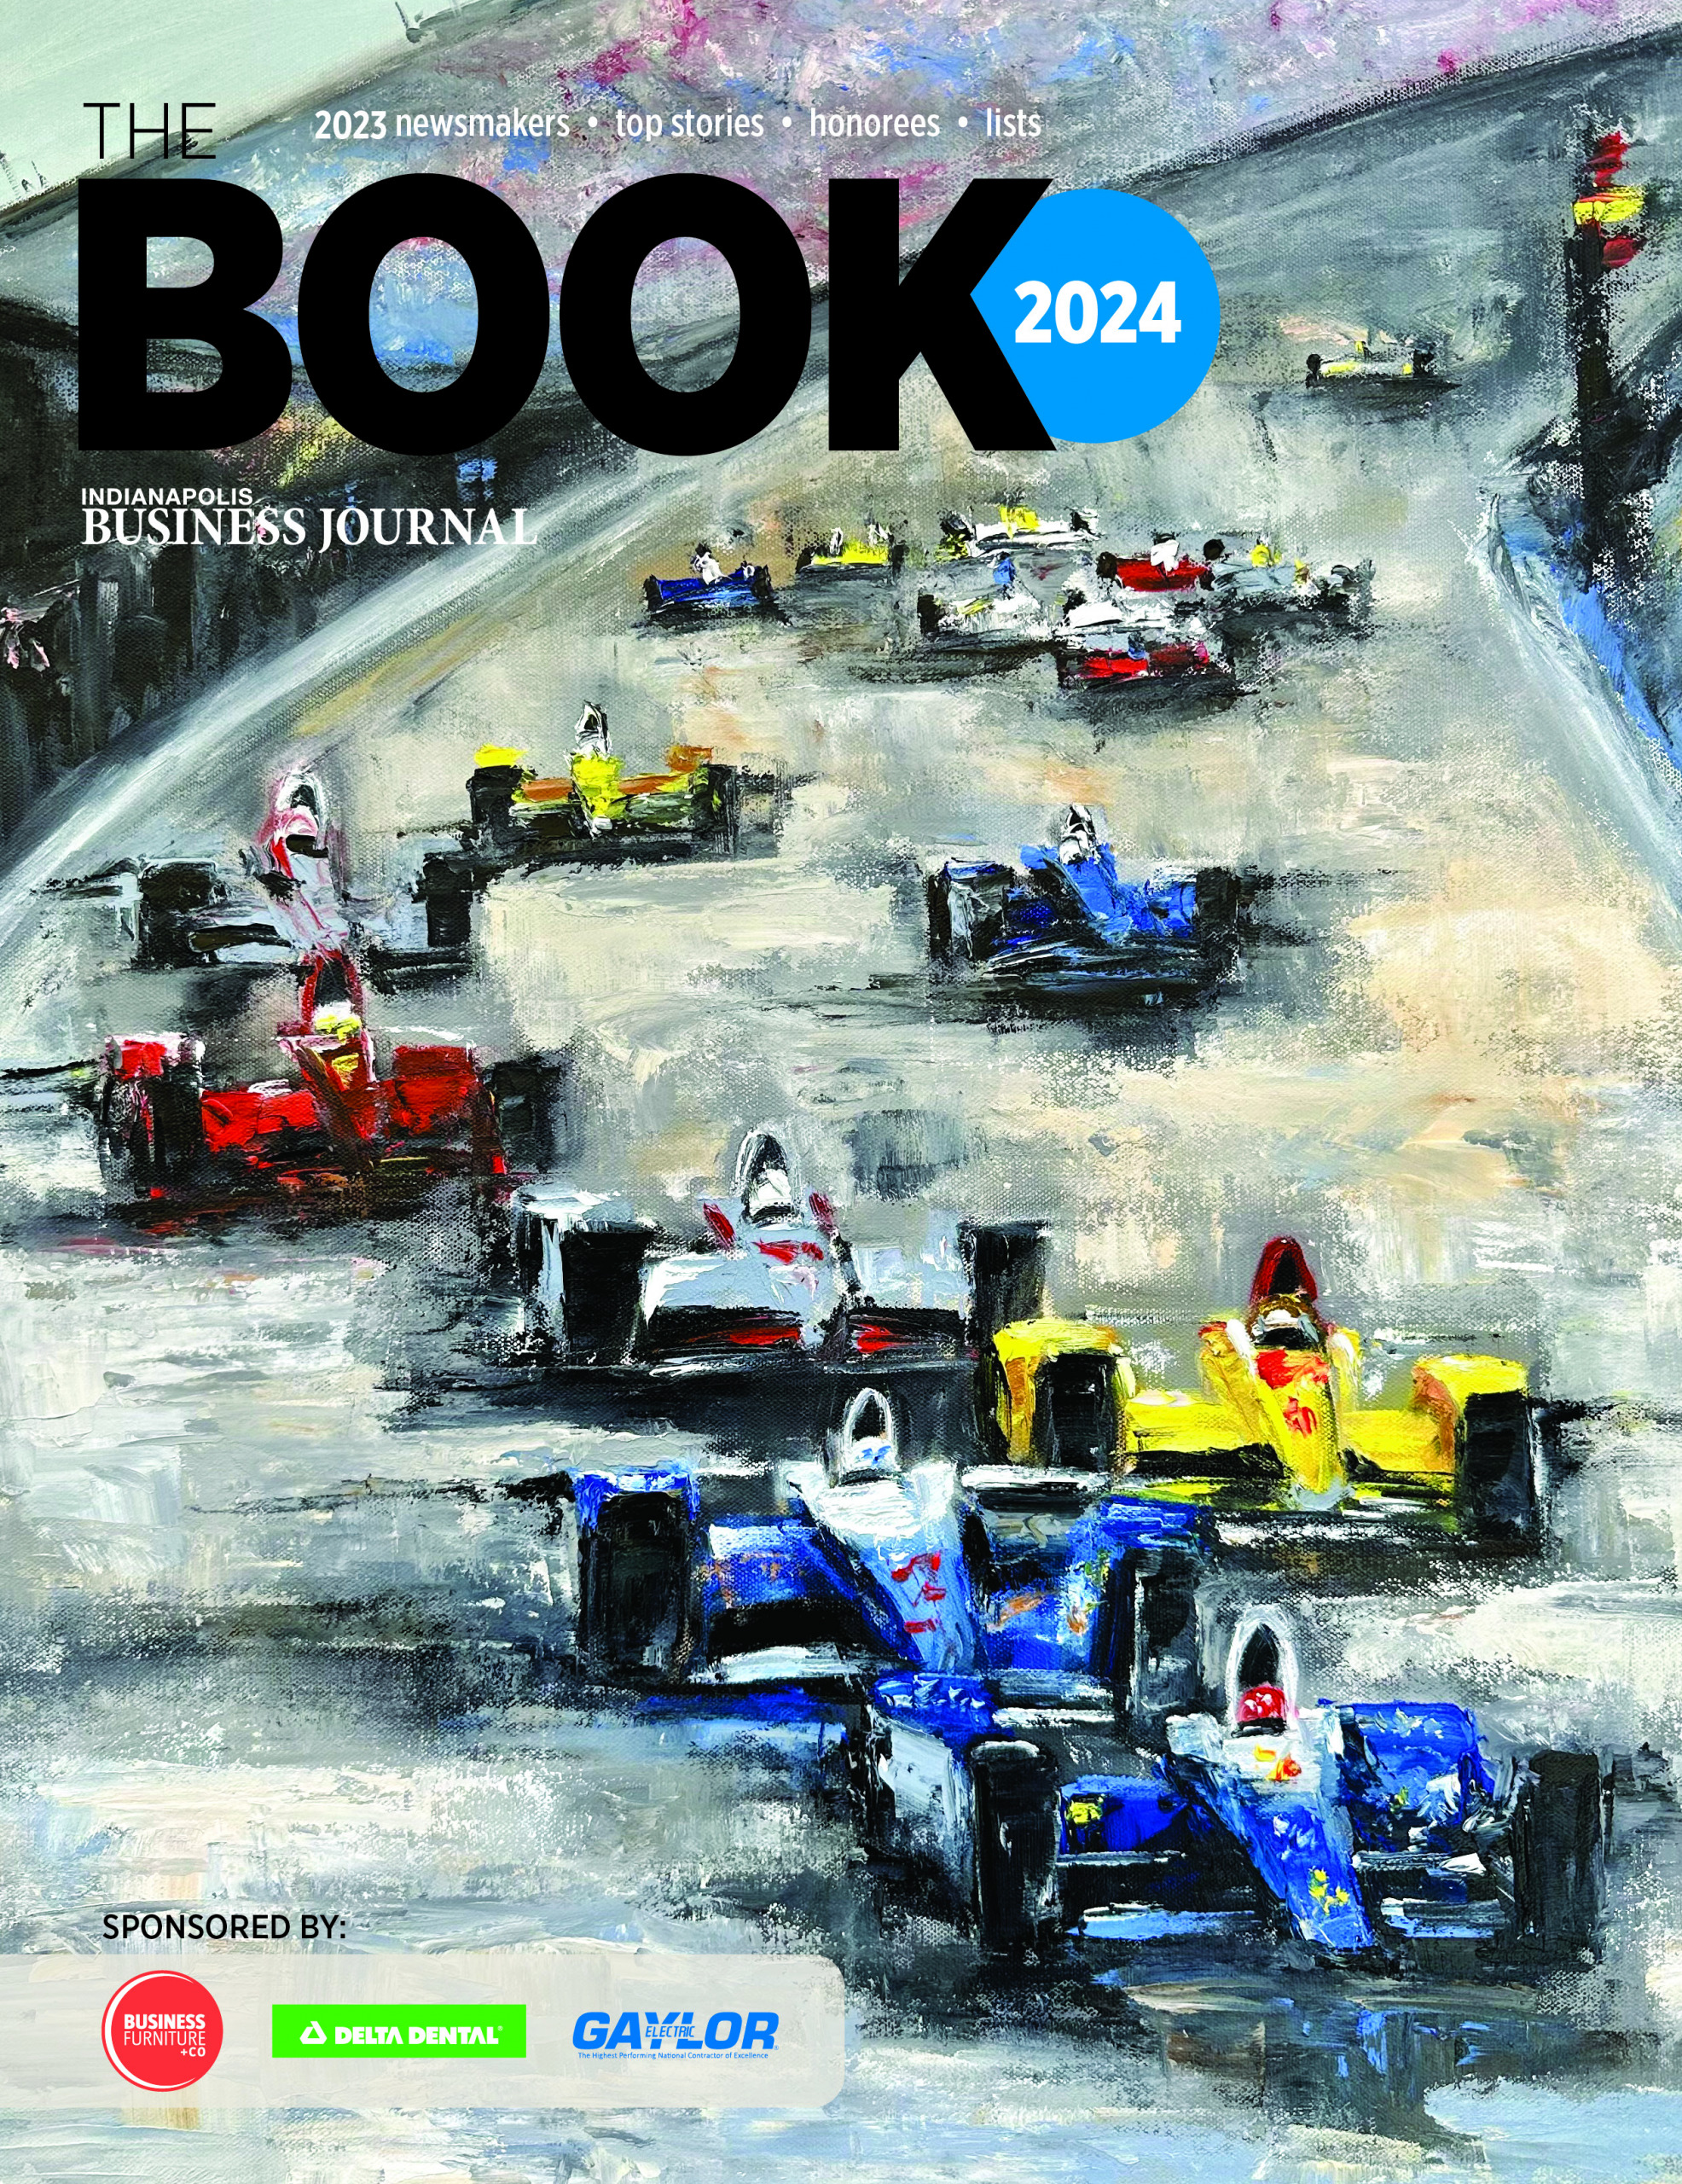 Cover of IBJ's 2024 The Book with a painted scene of Indy cars racing on a track